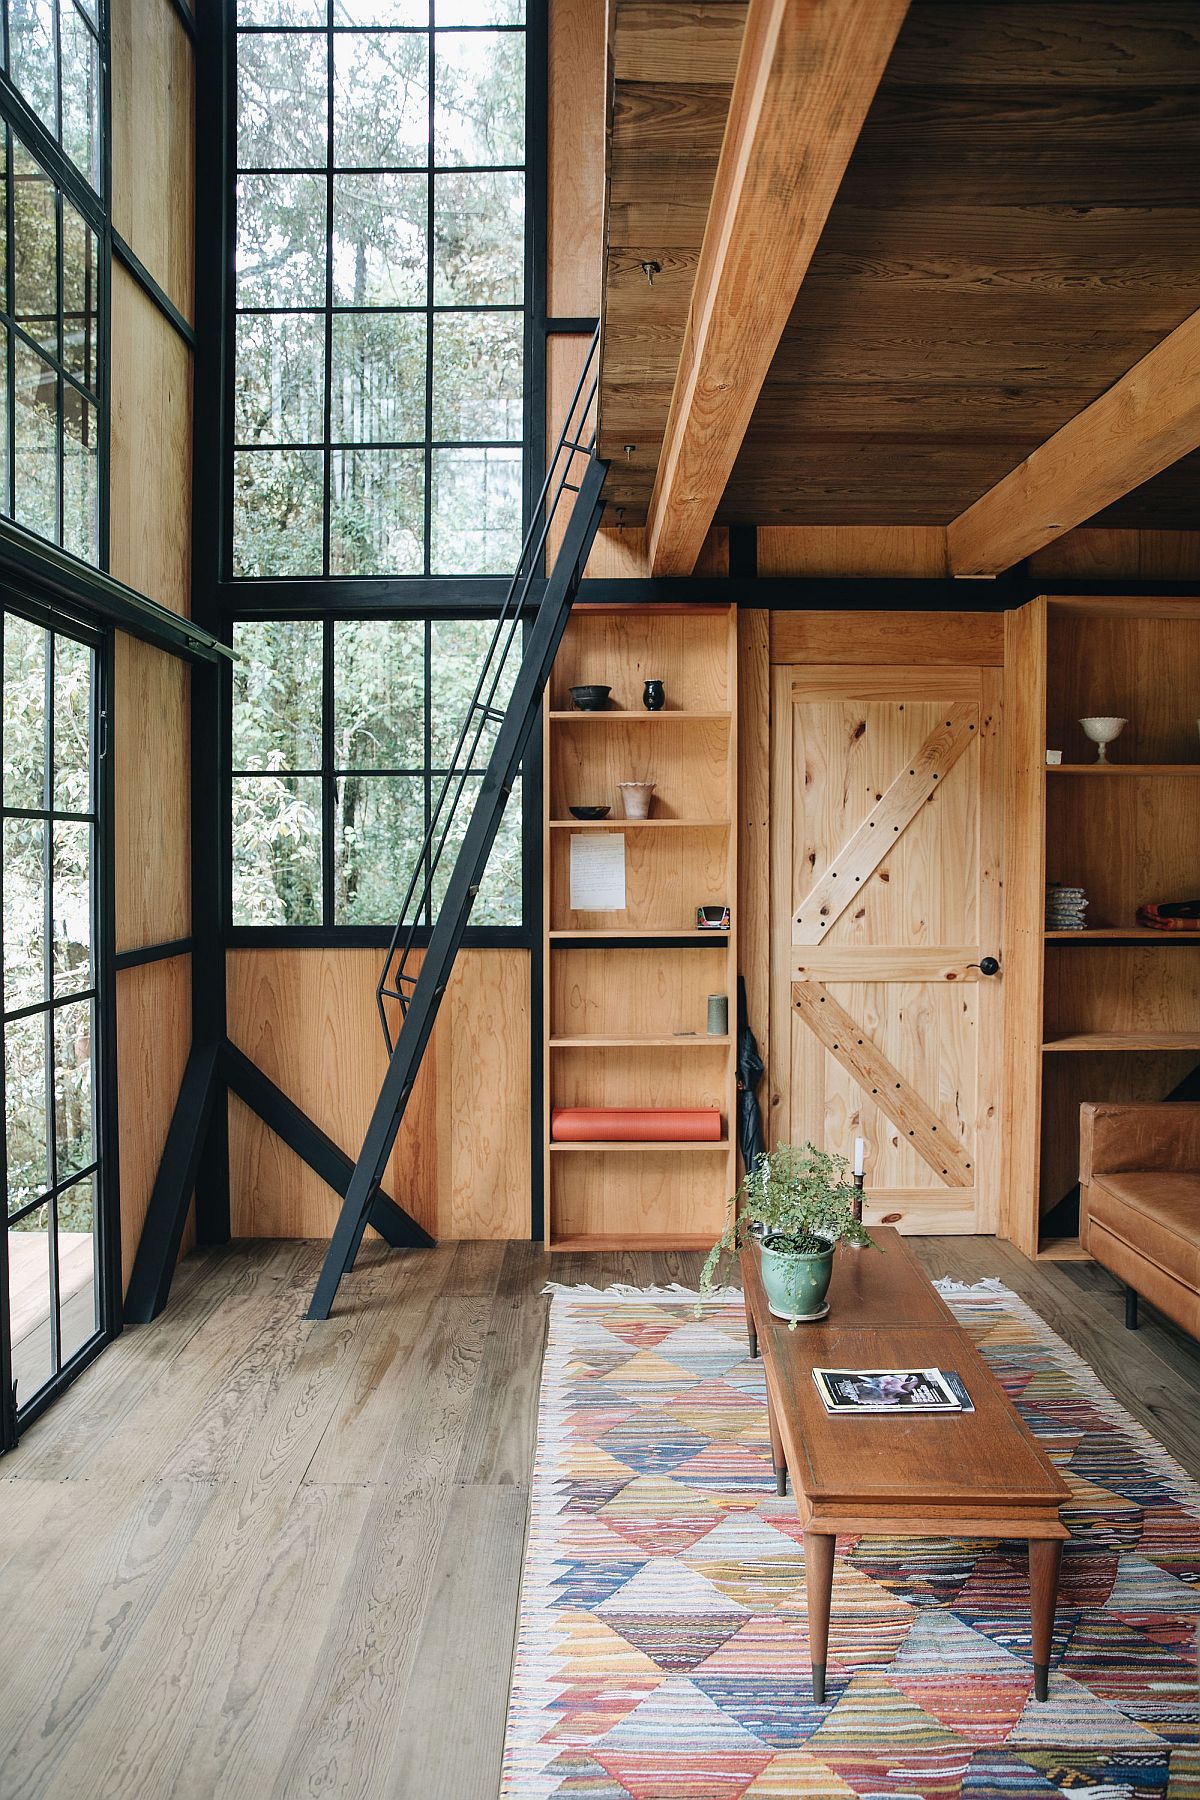 Locally-sourced-pine-wood-coupled-with-glass-and-metal-windows-inside-the-stylish-cabin-69890